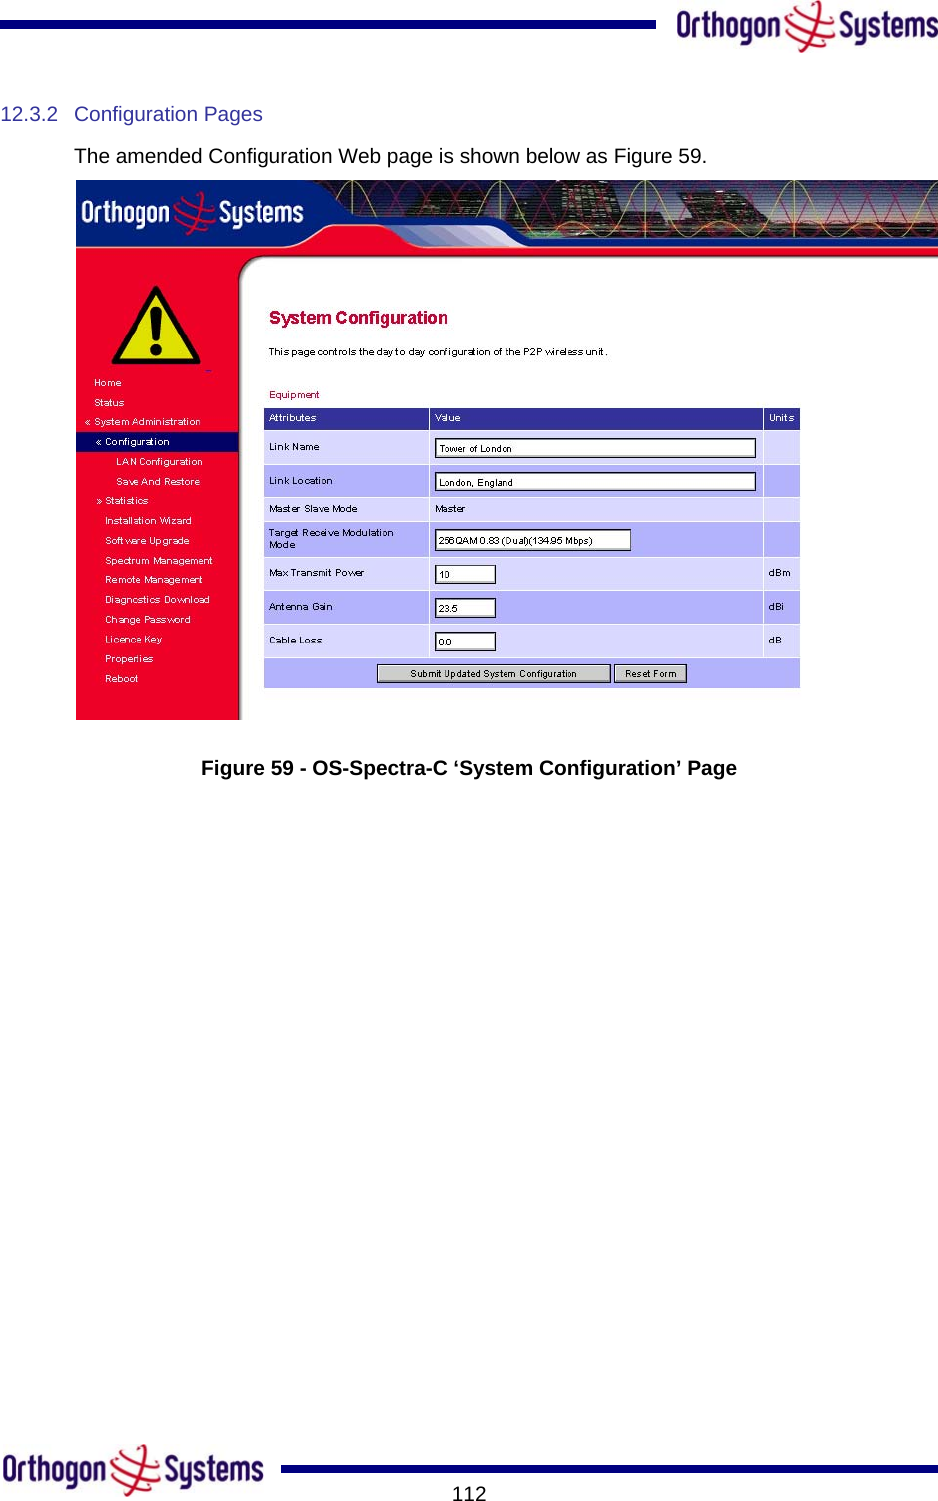       11212.3.2 Configuration Pages The amended Configuration Web page is shown below as Figure 59.  Figure 59 - OS-Spectra-C ‘System Configuration’ Page 